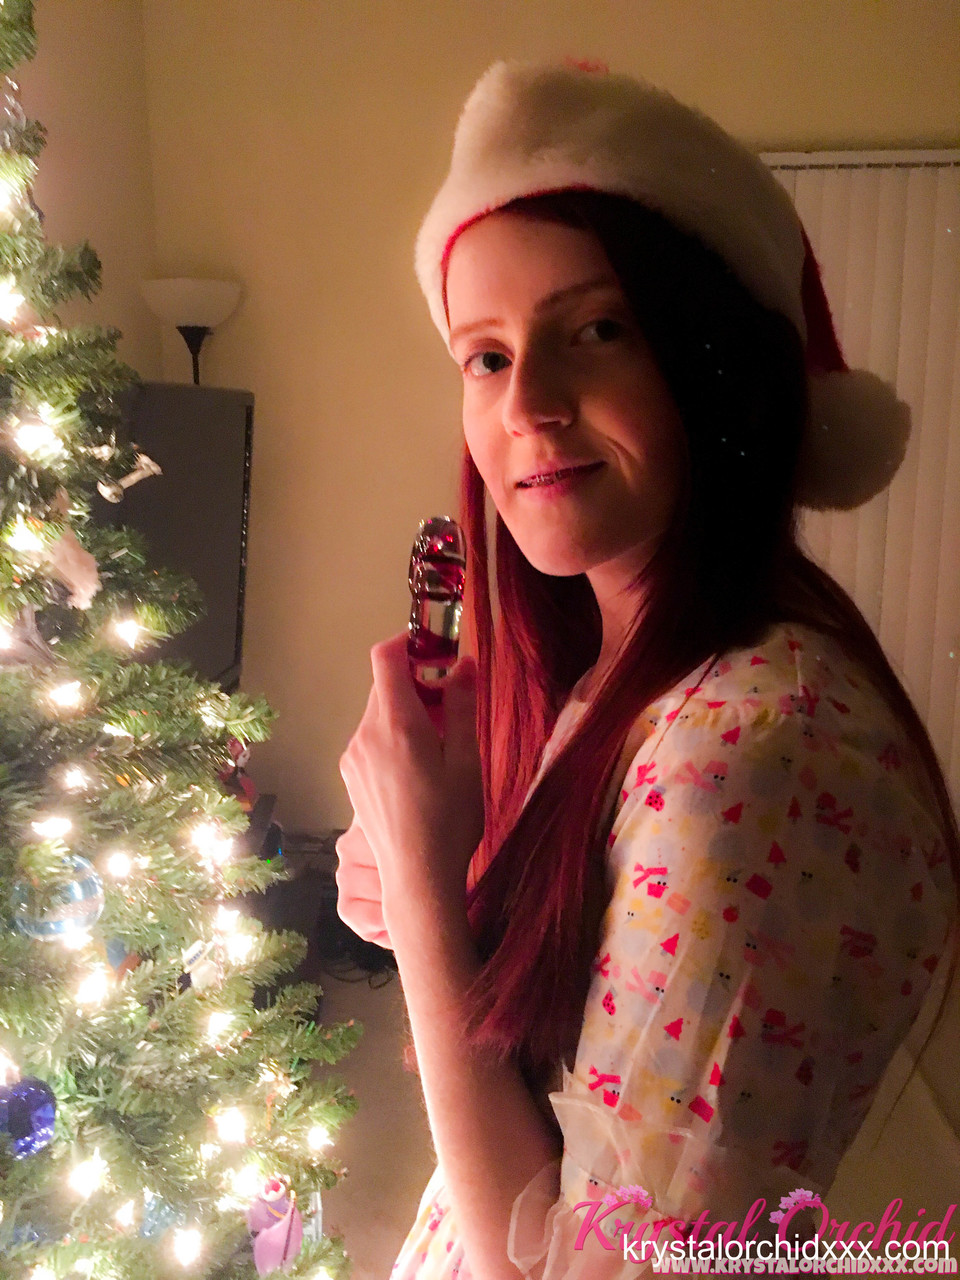 Redheaded nympho Krystal Orchid stripping & masturbating in her Xmas hat photo porno #424927597 | Cherry Fae Pics, Krystal Orchid, Christmas, porno mobile